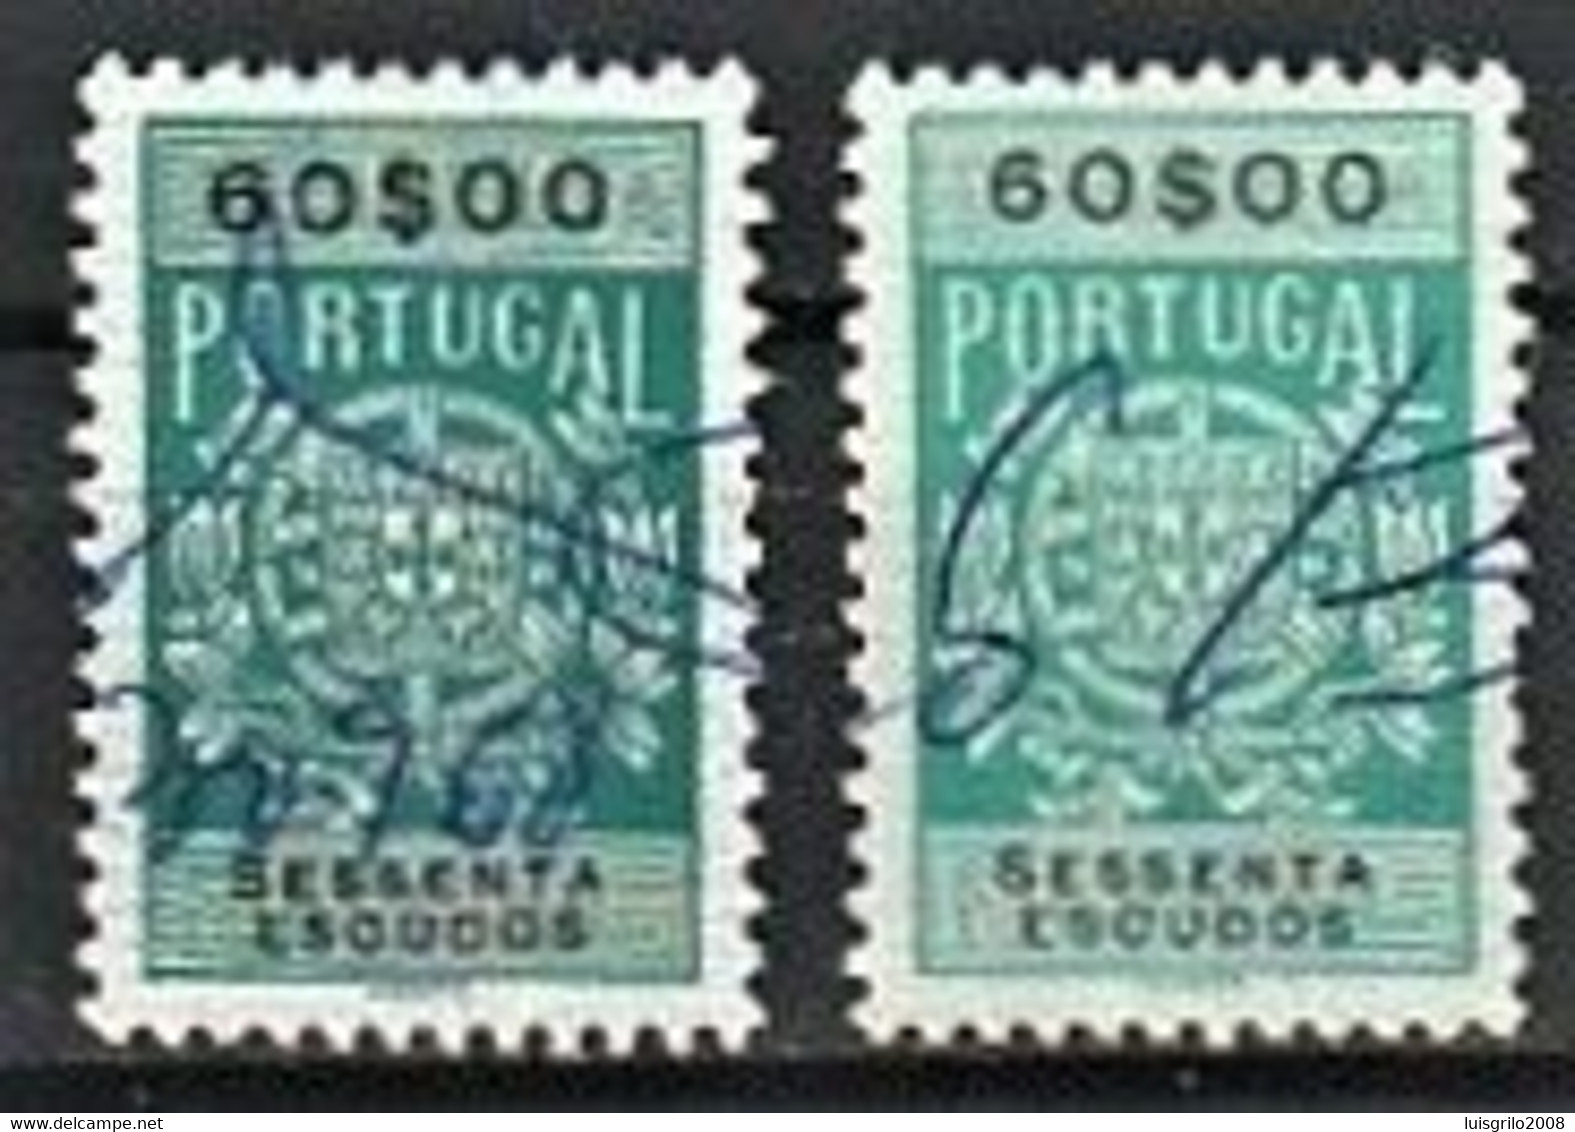 Fiscal/ Revenue, Portugal 1940 - Estampilha Fiscal -|- 60$00 - COLOR VARIANT - Is The Stamp Of The Right - Usati